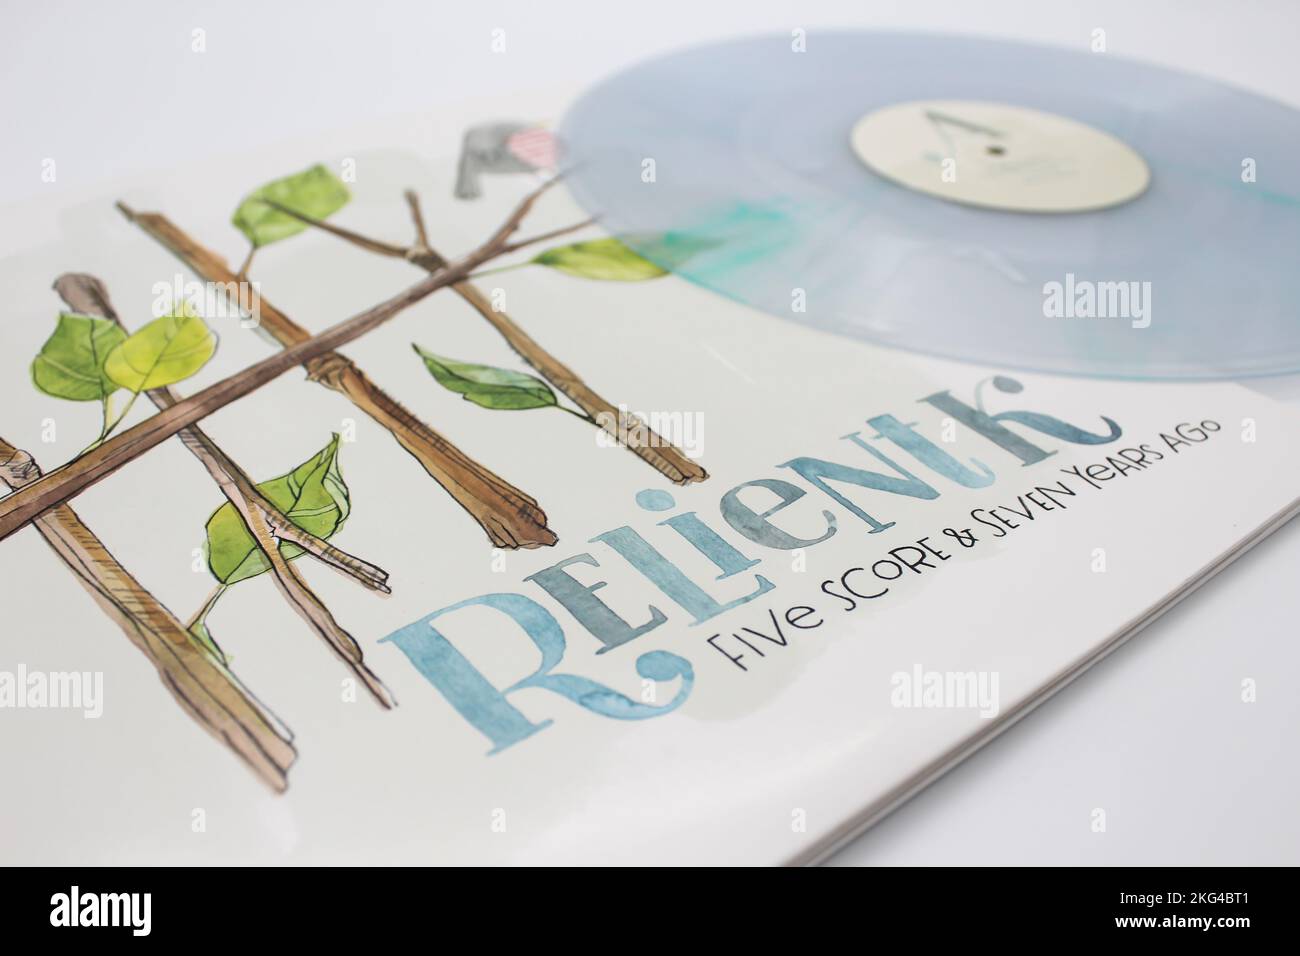 Five Score and Seven Years Ago 10th Anniversary music album on LP vinyl record disc from the Christian band, Relient K. Album cover Stock Photo